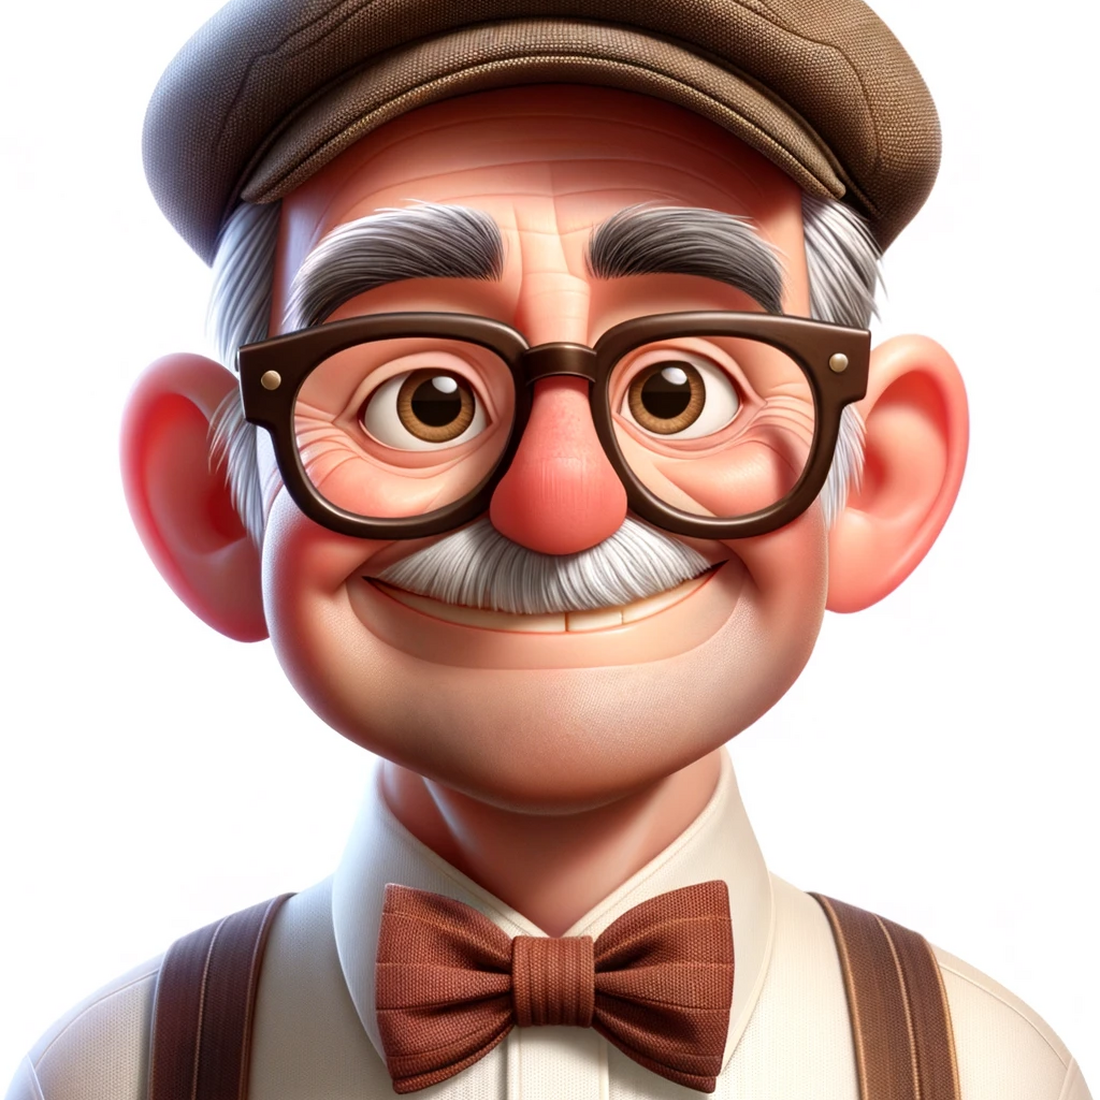 AI art of an older gentleman, wearing a hat and glasses, in a cartoon style